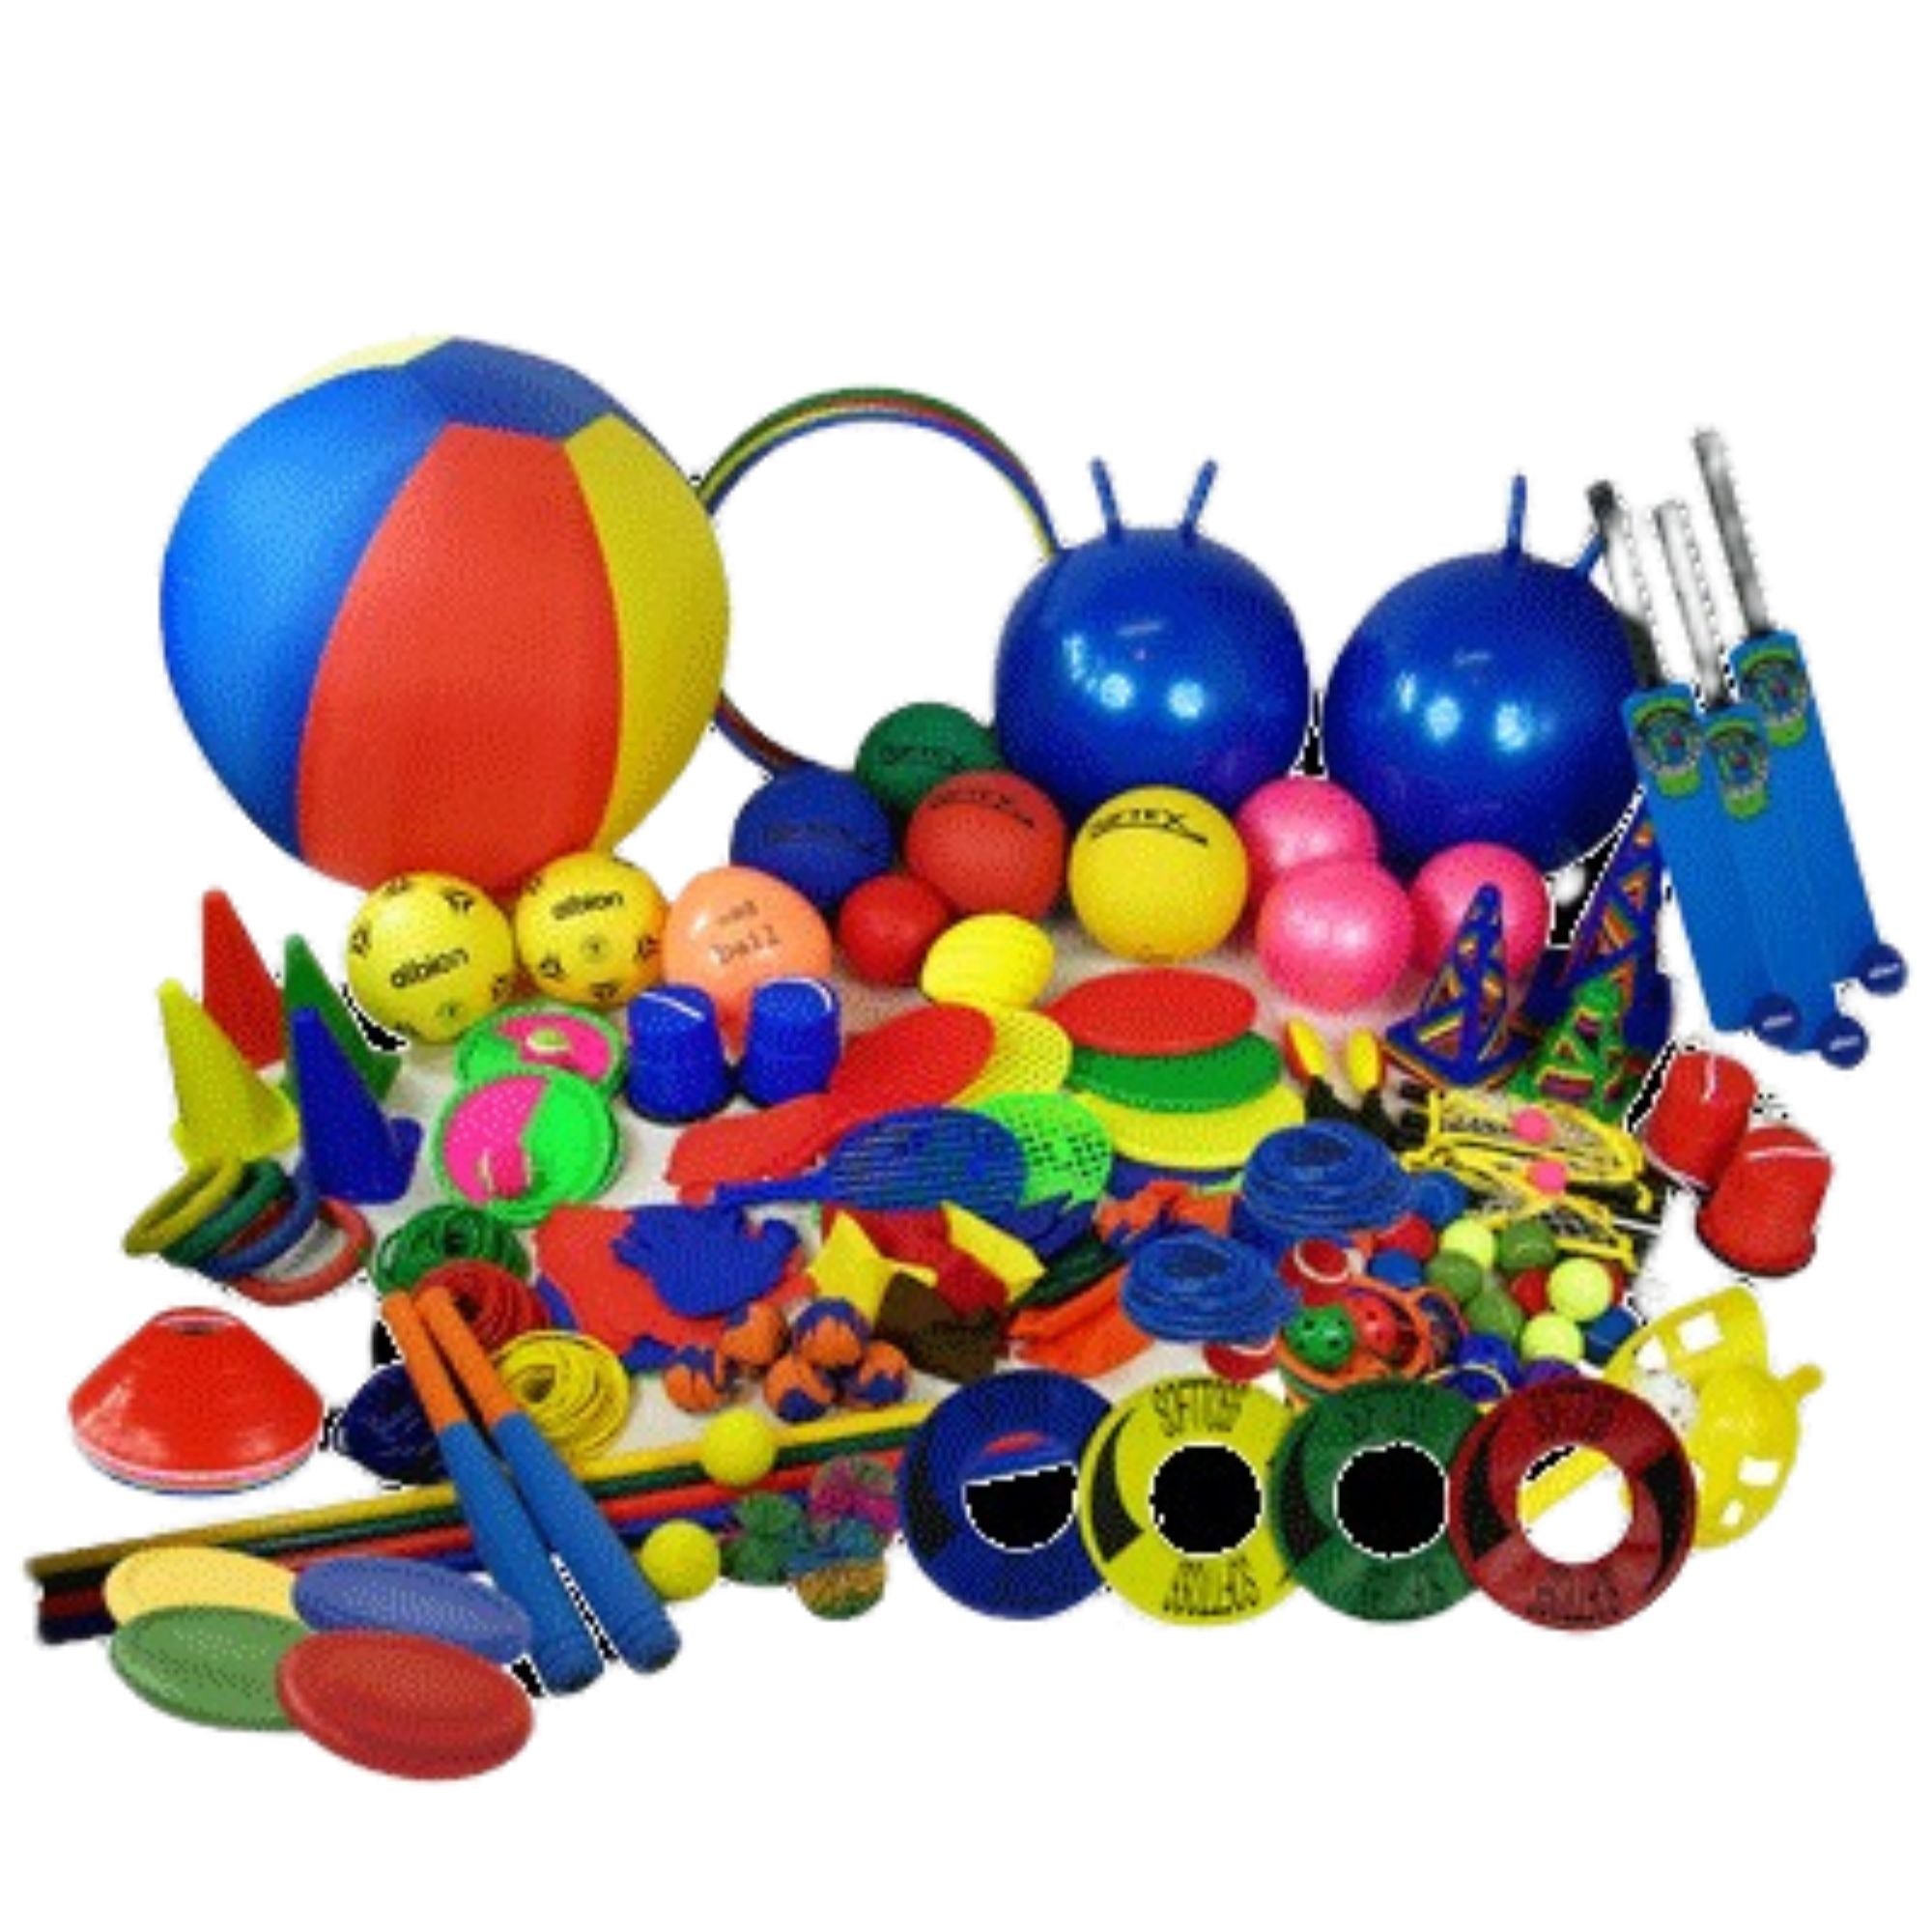 GetSetGo Multi Activity Pack B, The GetSetGo Multi Activity Pack B is a comprehensive set designed to engage children in a variety of physical activities, encouraging them to achieve the recommended 30 minutes of daily exercise. It also supports emotional and mental well-being by providing engaging and entertaining activities. Components and Their Benefits: Throwing and Catching: 4 Rubber Quoits & 2 Catch Pad Sets: These are excellent for developing hand-eye coordination. 6 Sequence Discs: Perfect for targe